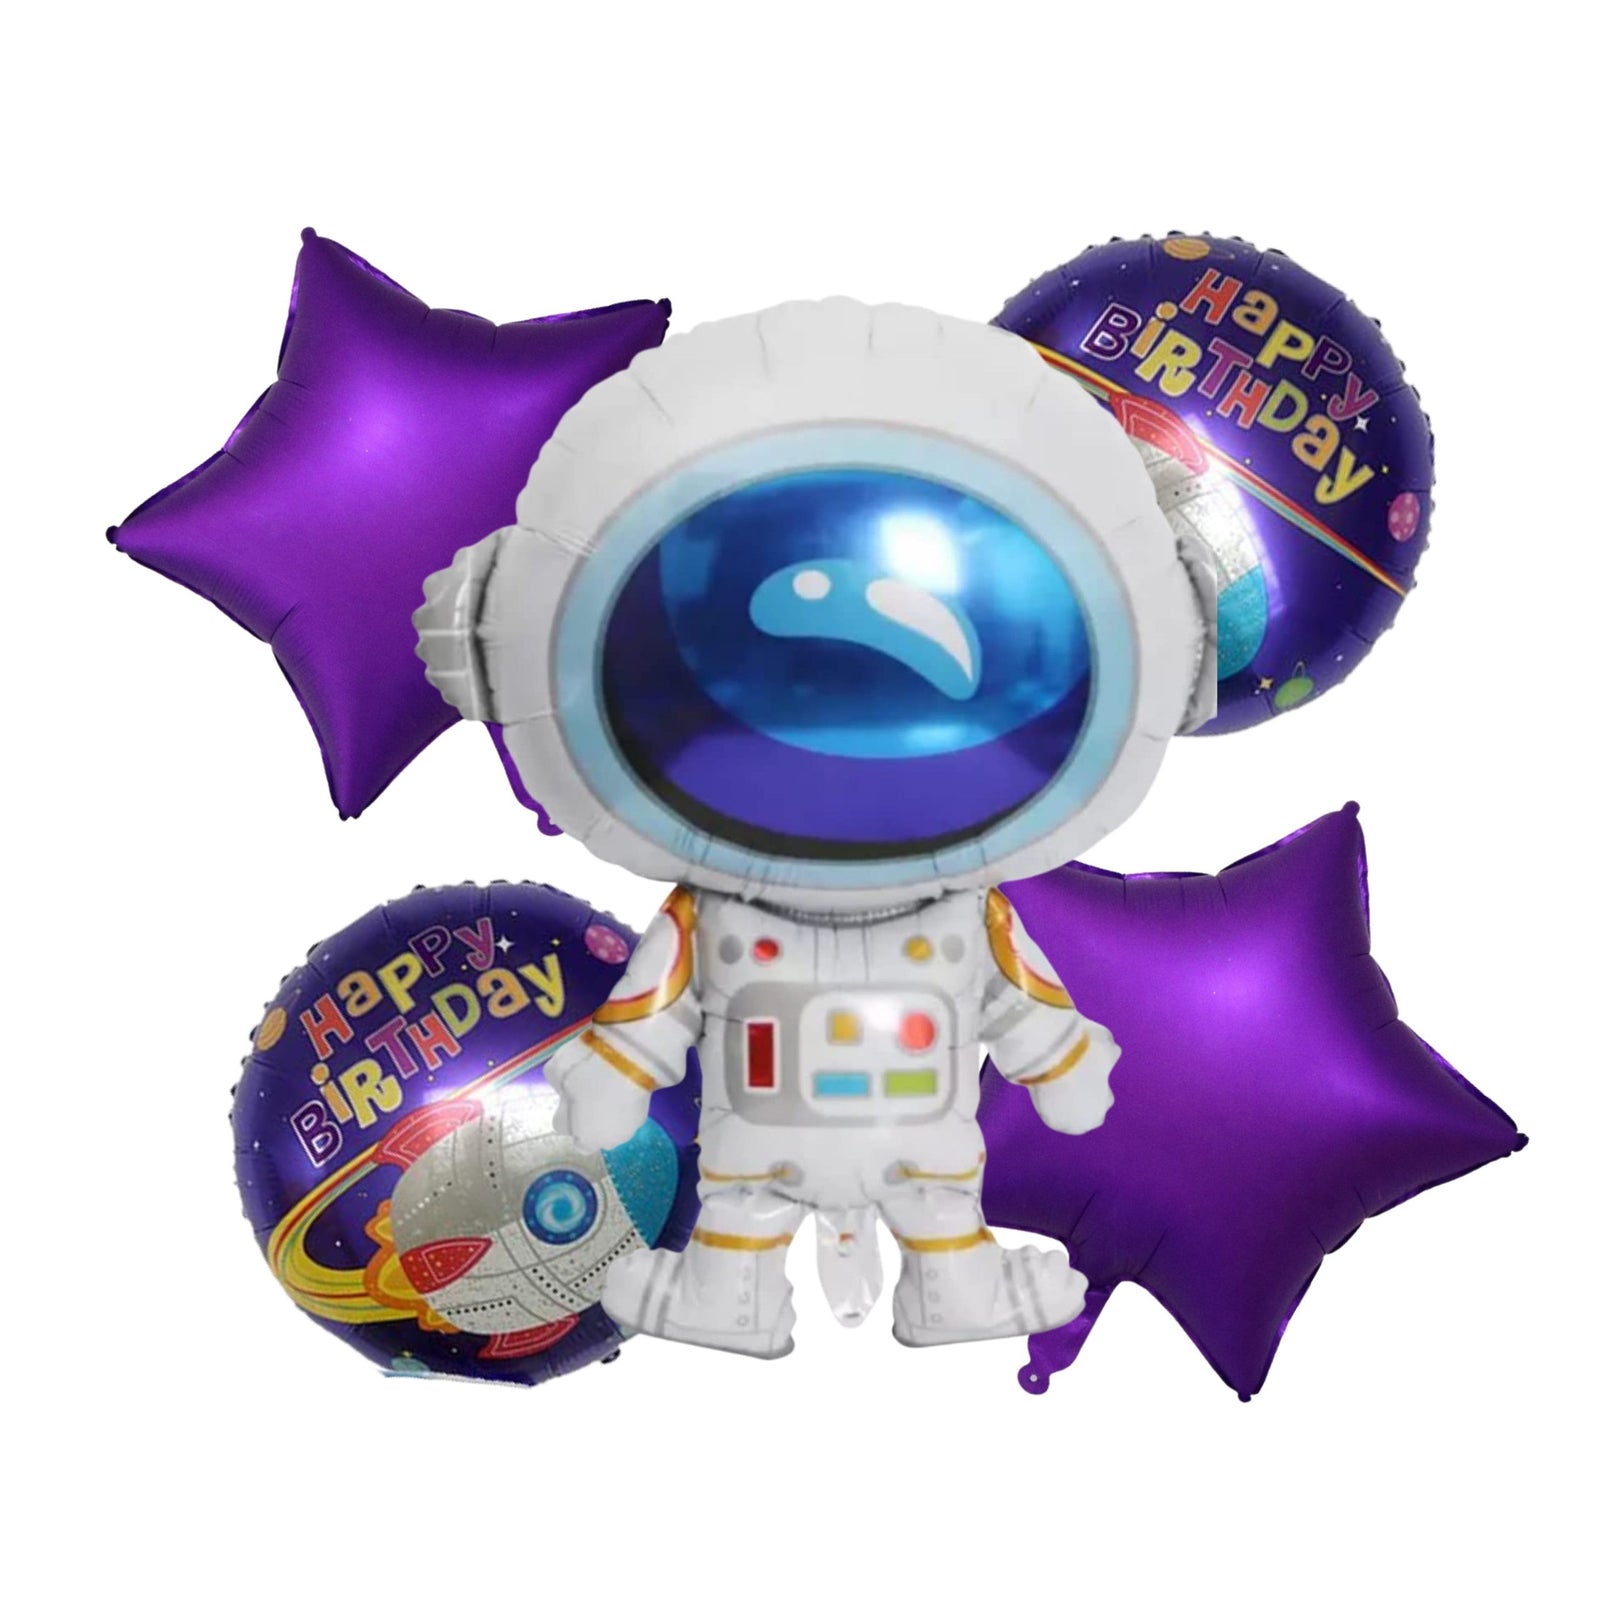 Party Decor Mall – Astronaut Happy Birthday Foil Balloon Set for Space Purple Theme Birthday Party – Pack of 5